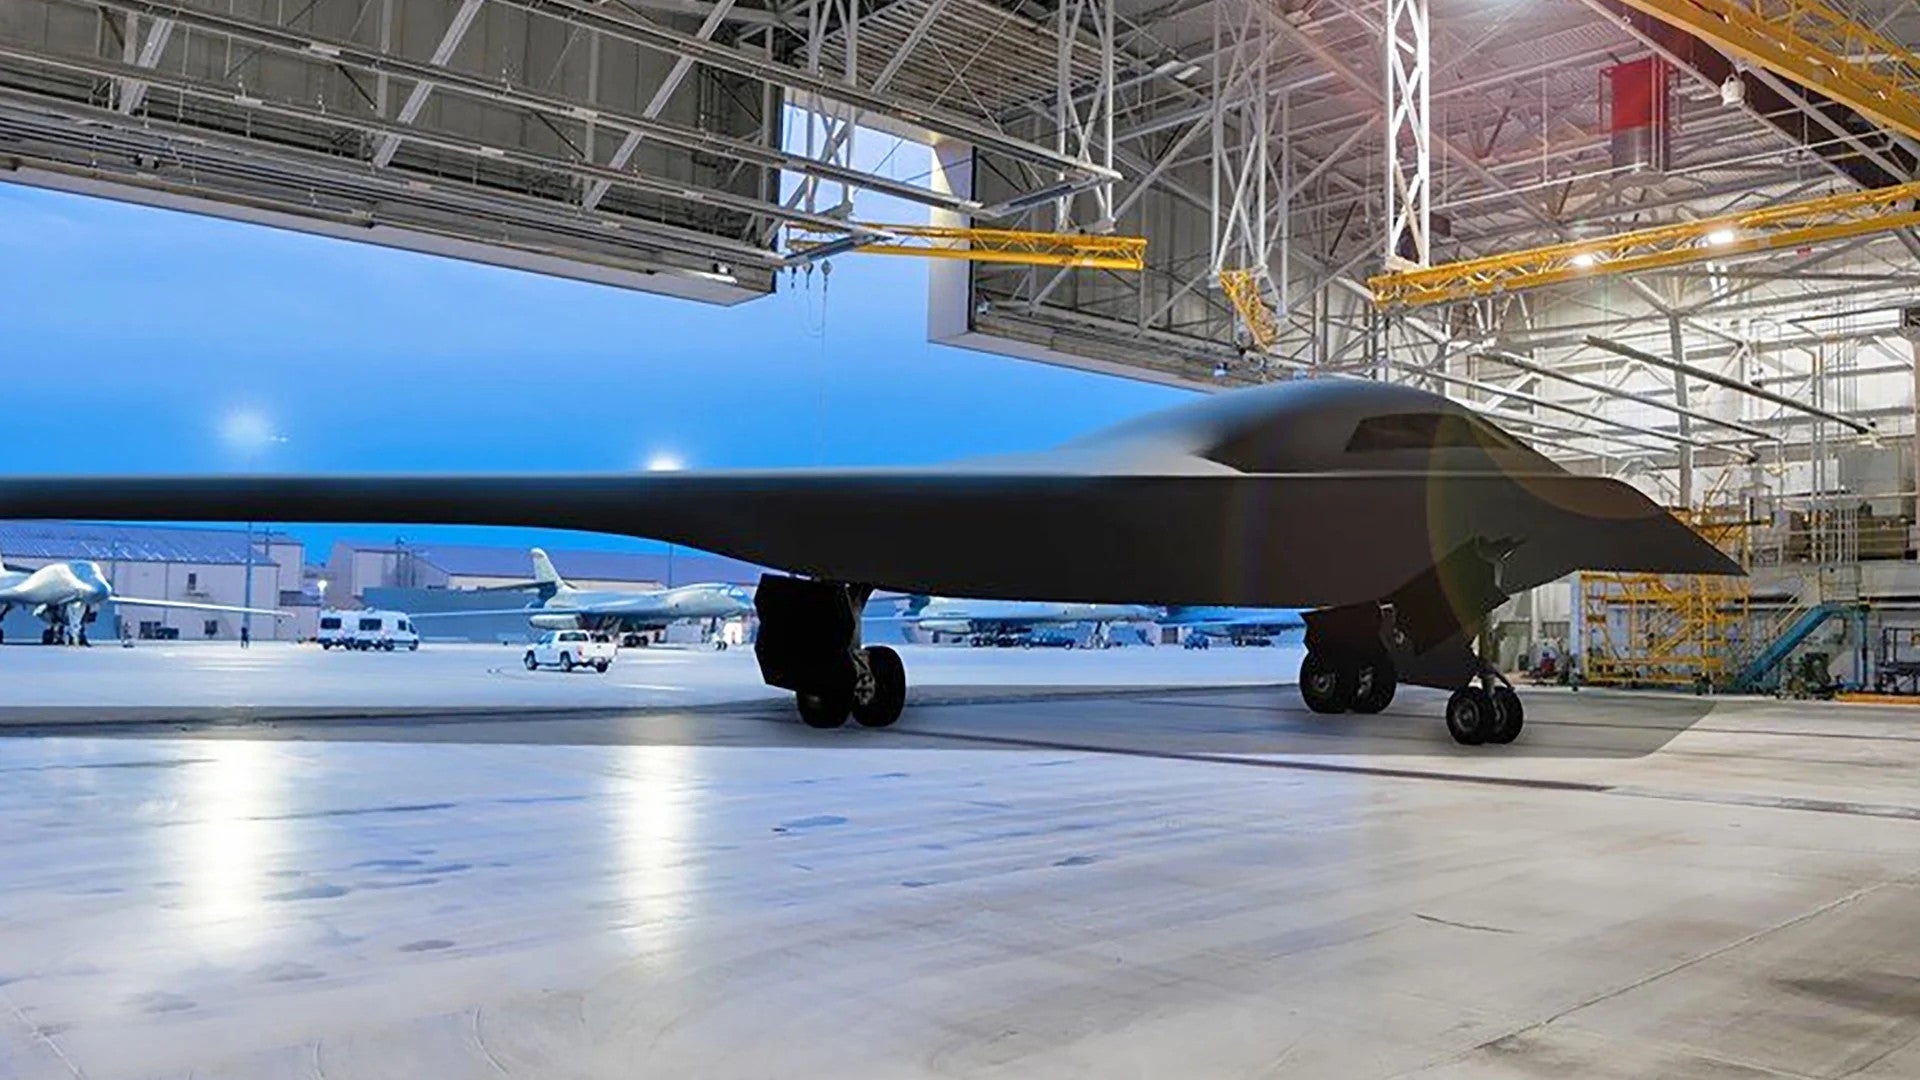 B-21 Raider Stealth Bomber Is "Starting To Look Like An Airplane"